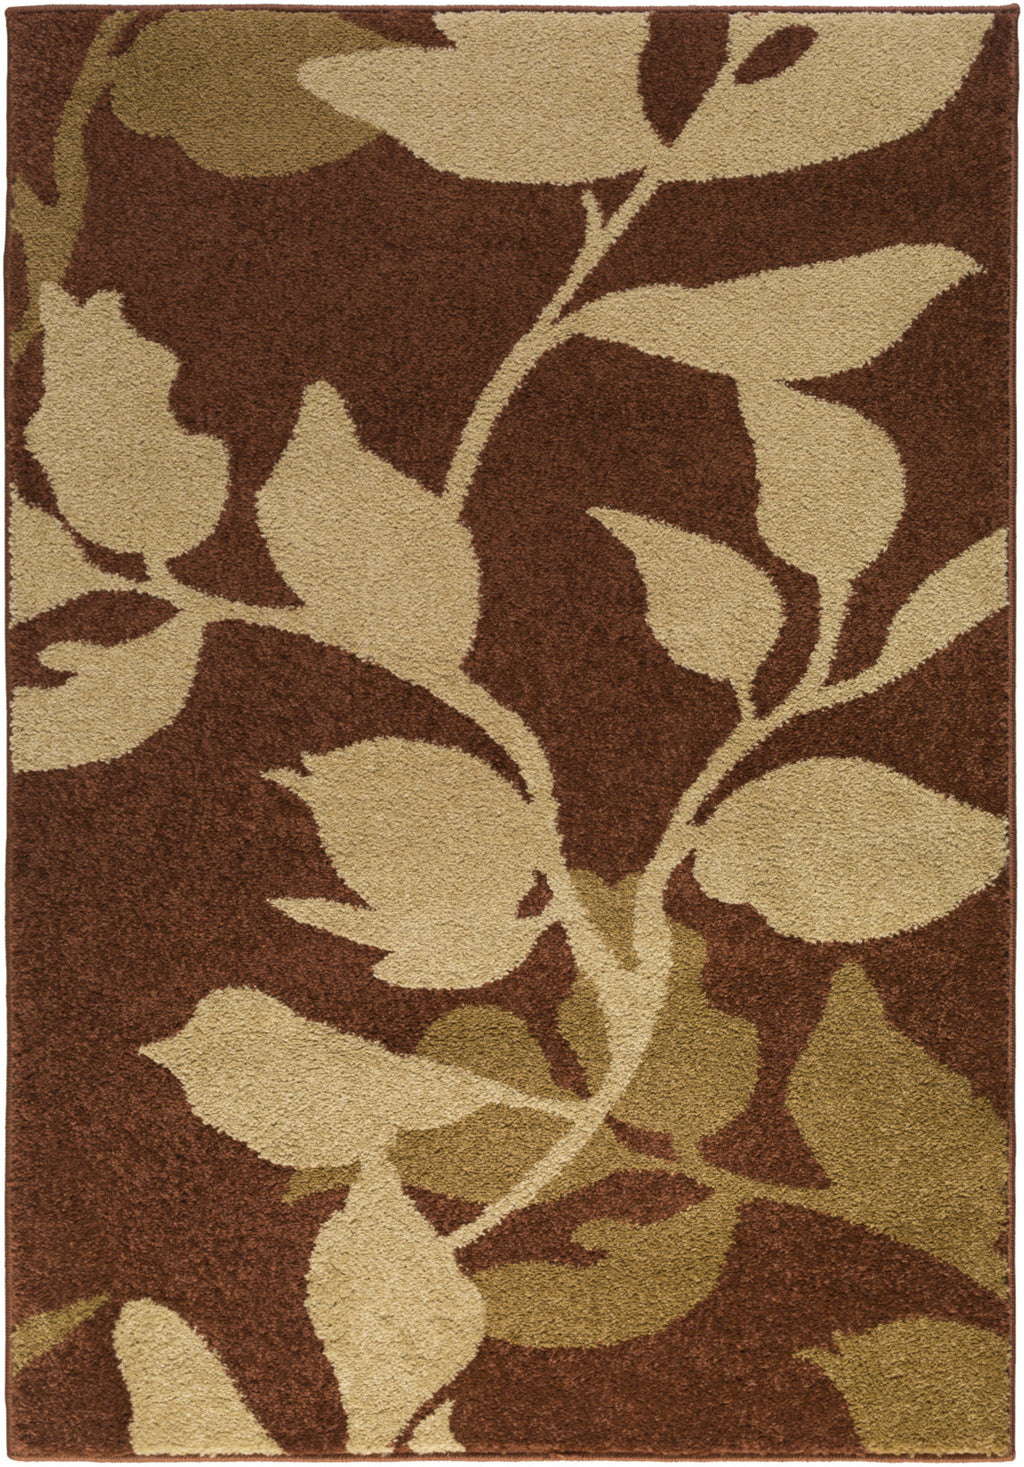 Surya River Home RVH-1009 Brown Area Rug by Mossy Oak 2'2'' X 3'